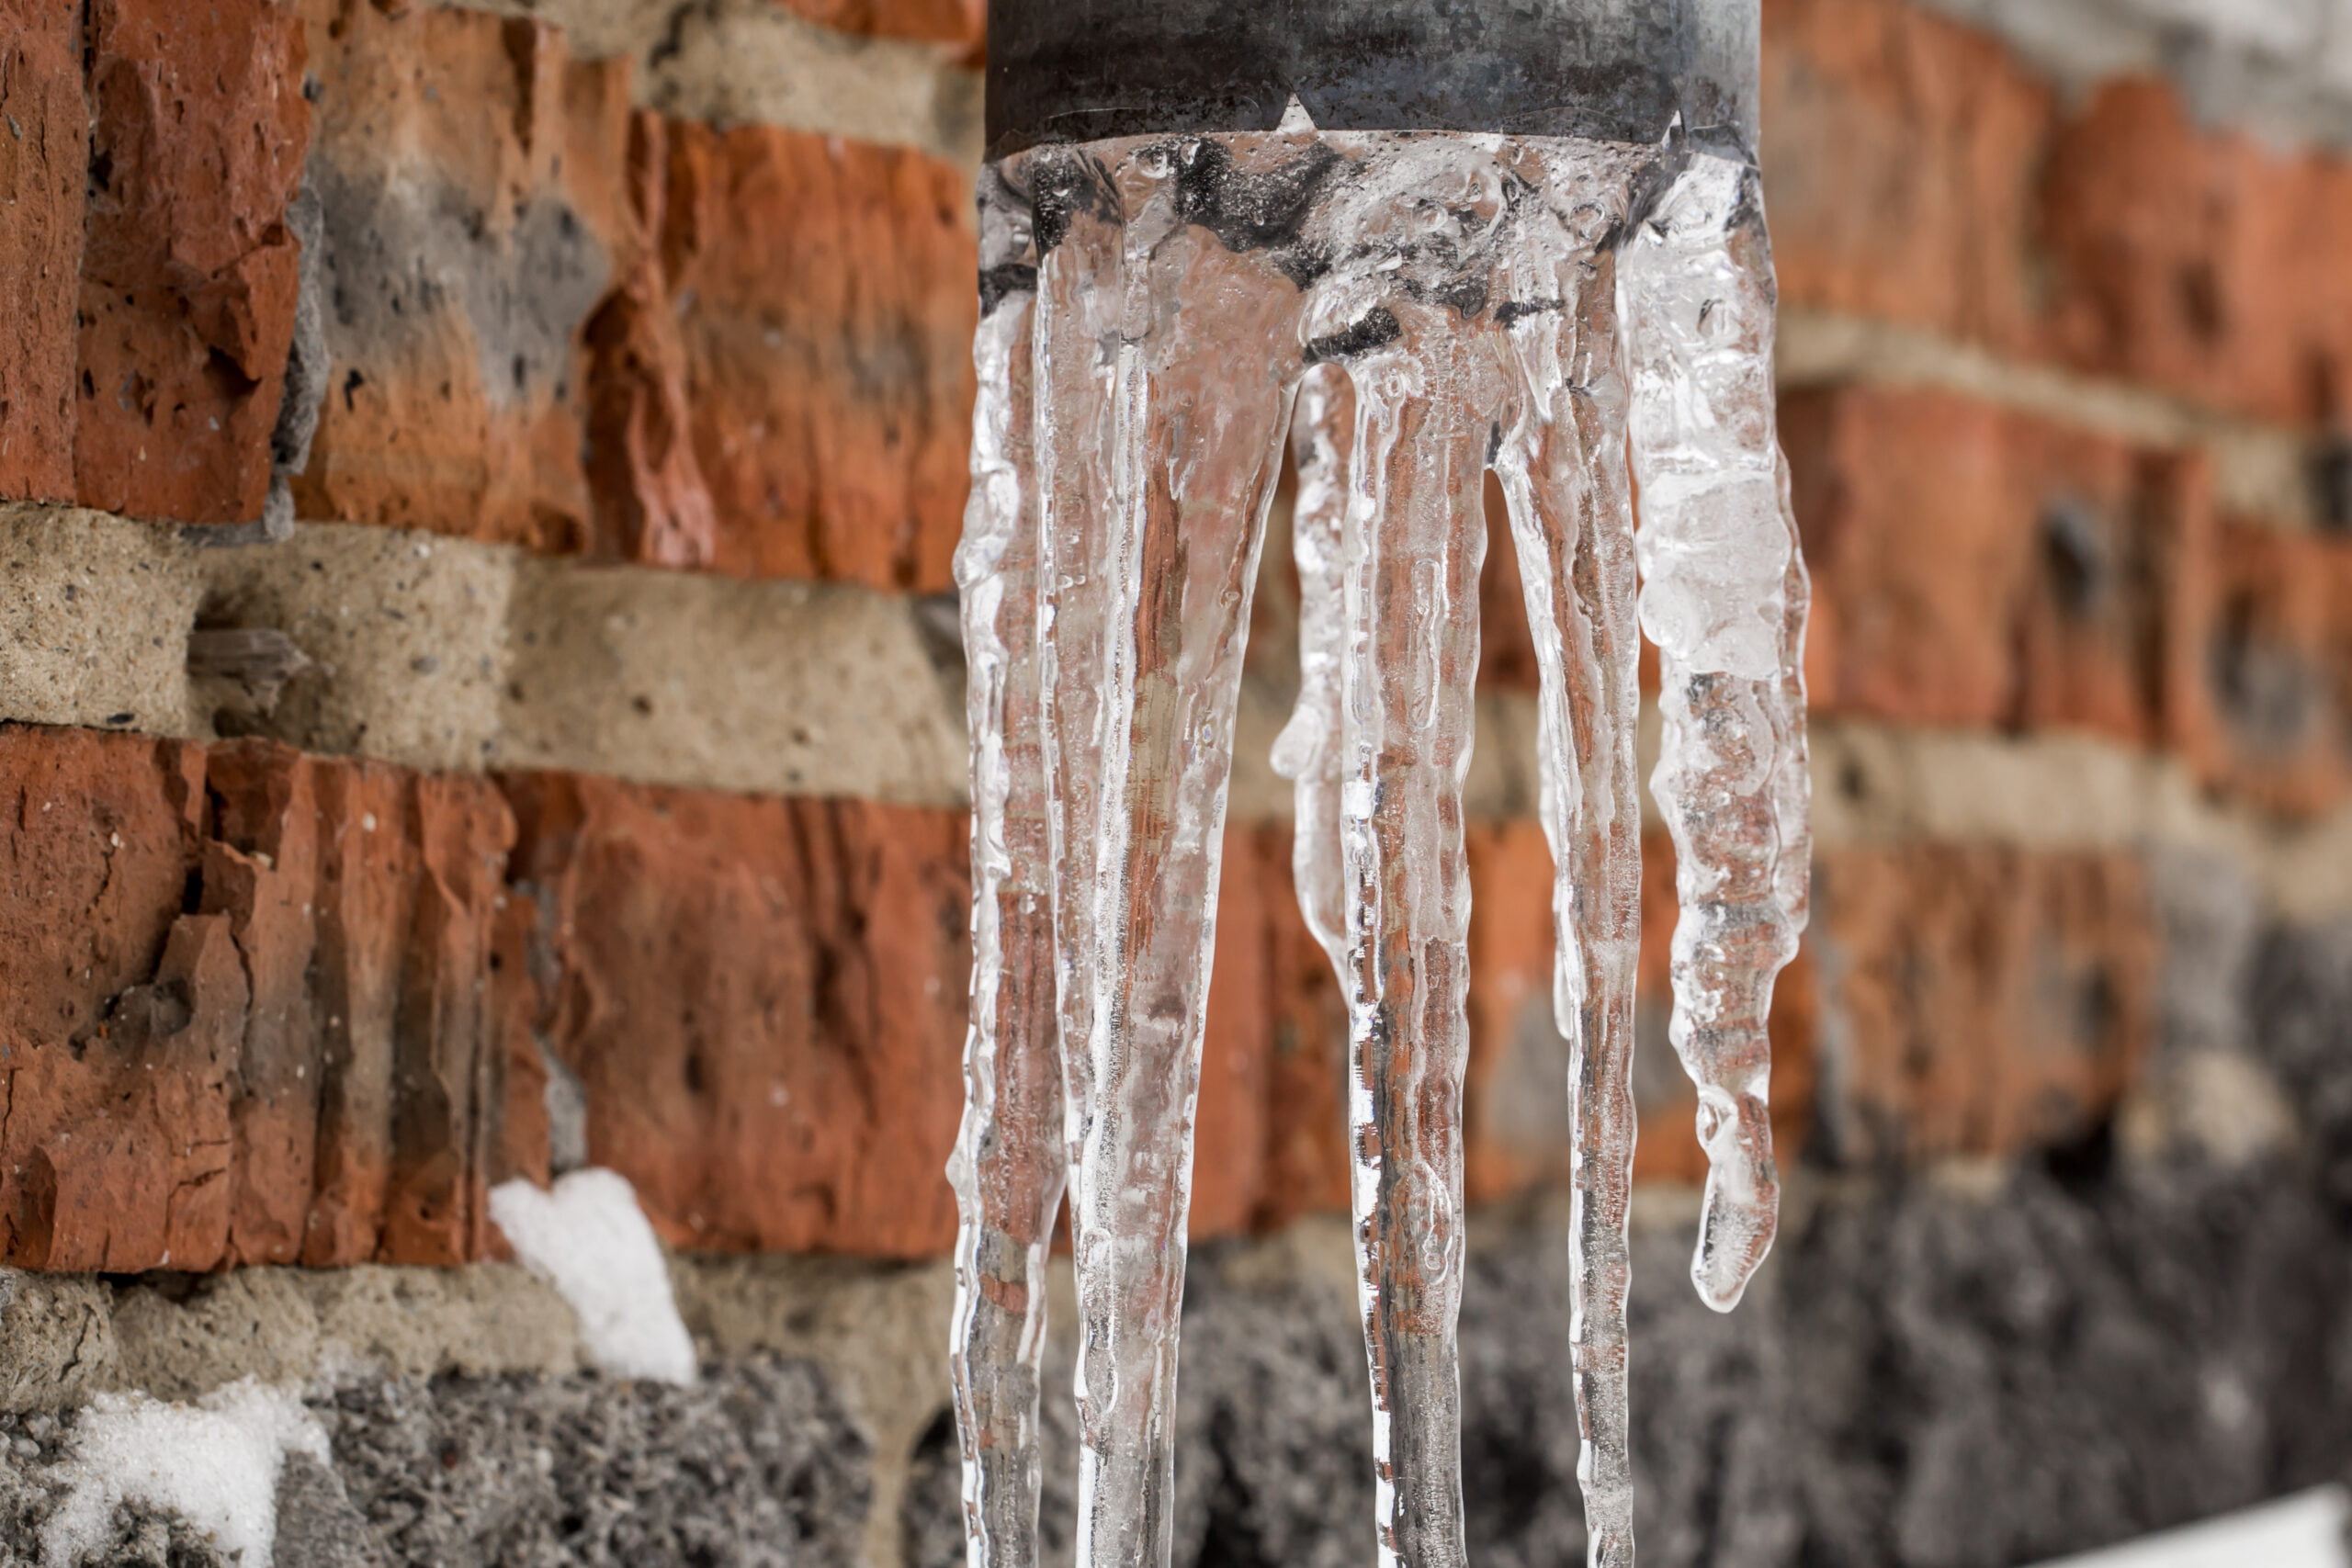 frozen pipes burst after winter temoeratures causing water damage